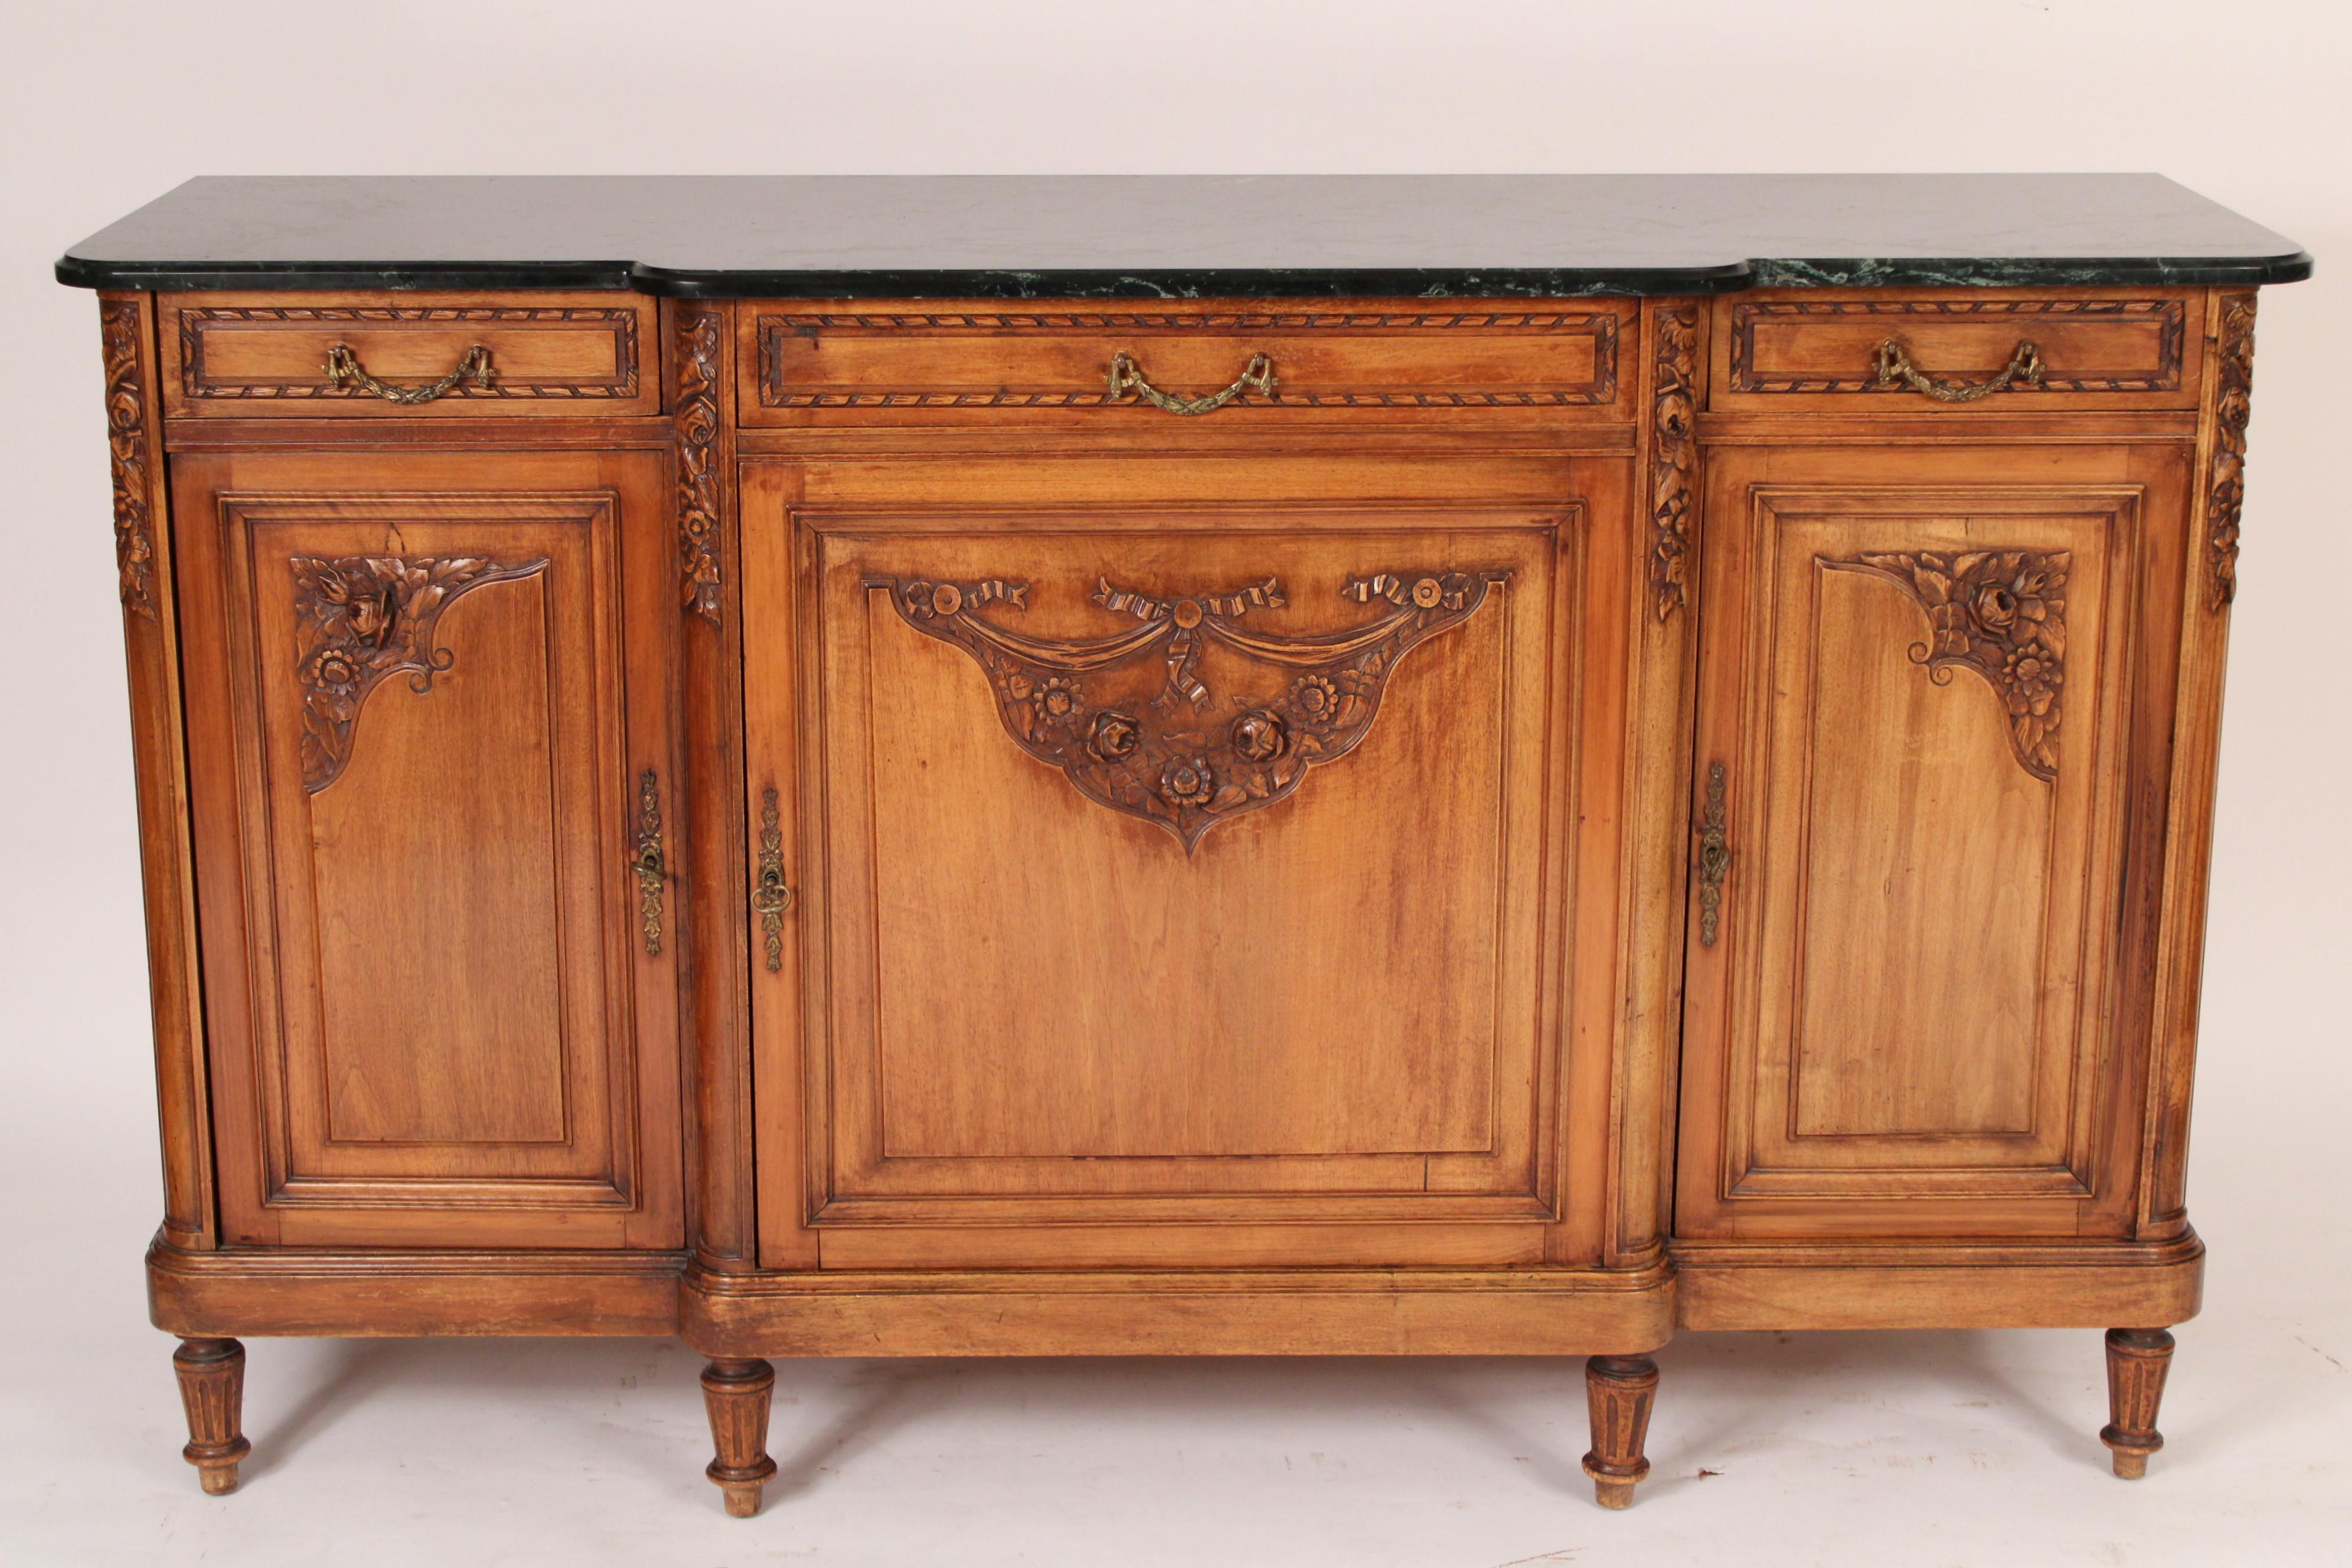 Louis XVI style walnut and beech wood marble top buffet, circa 1910. With a replaced dark green marble top over 3 drawers with bronze swag drawer pulls, three doors with foliate carvings, resting fluted tapered legs. Nice walnut color. Hand dove